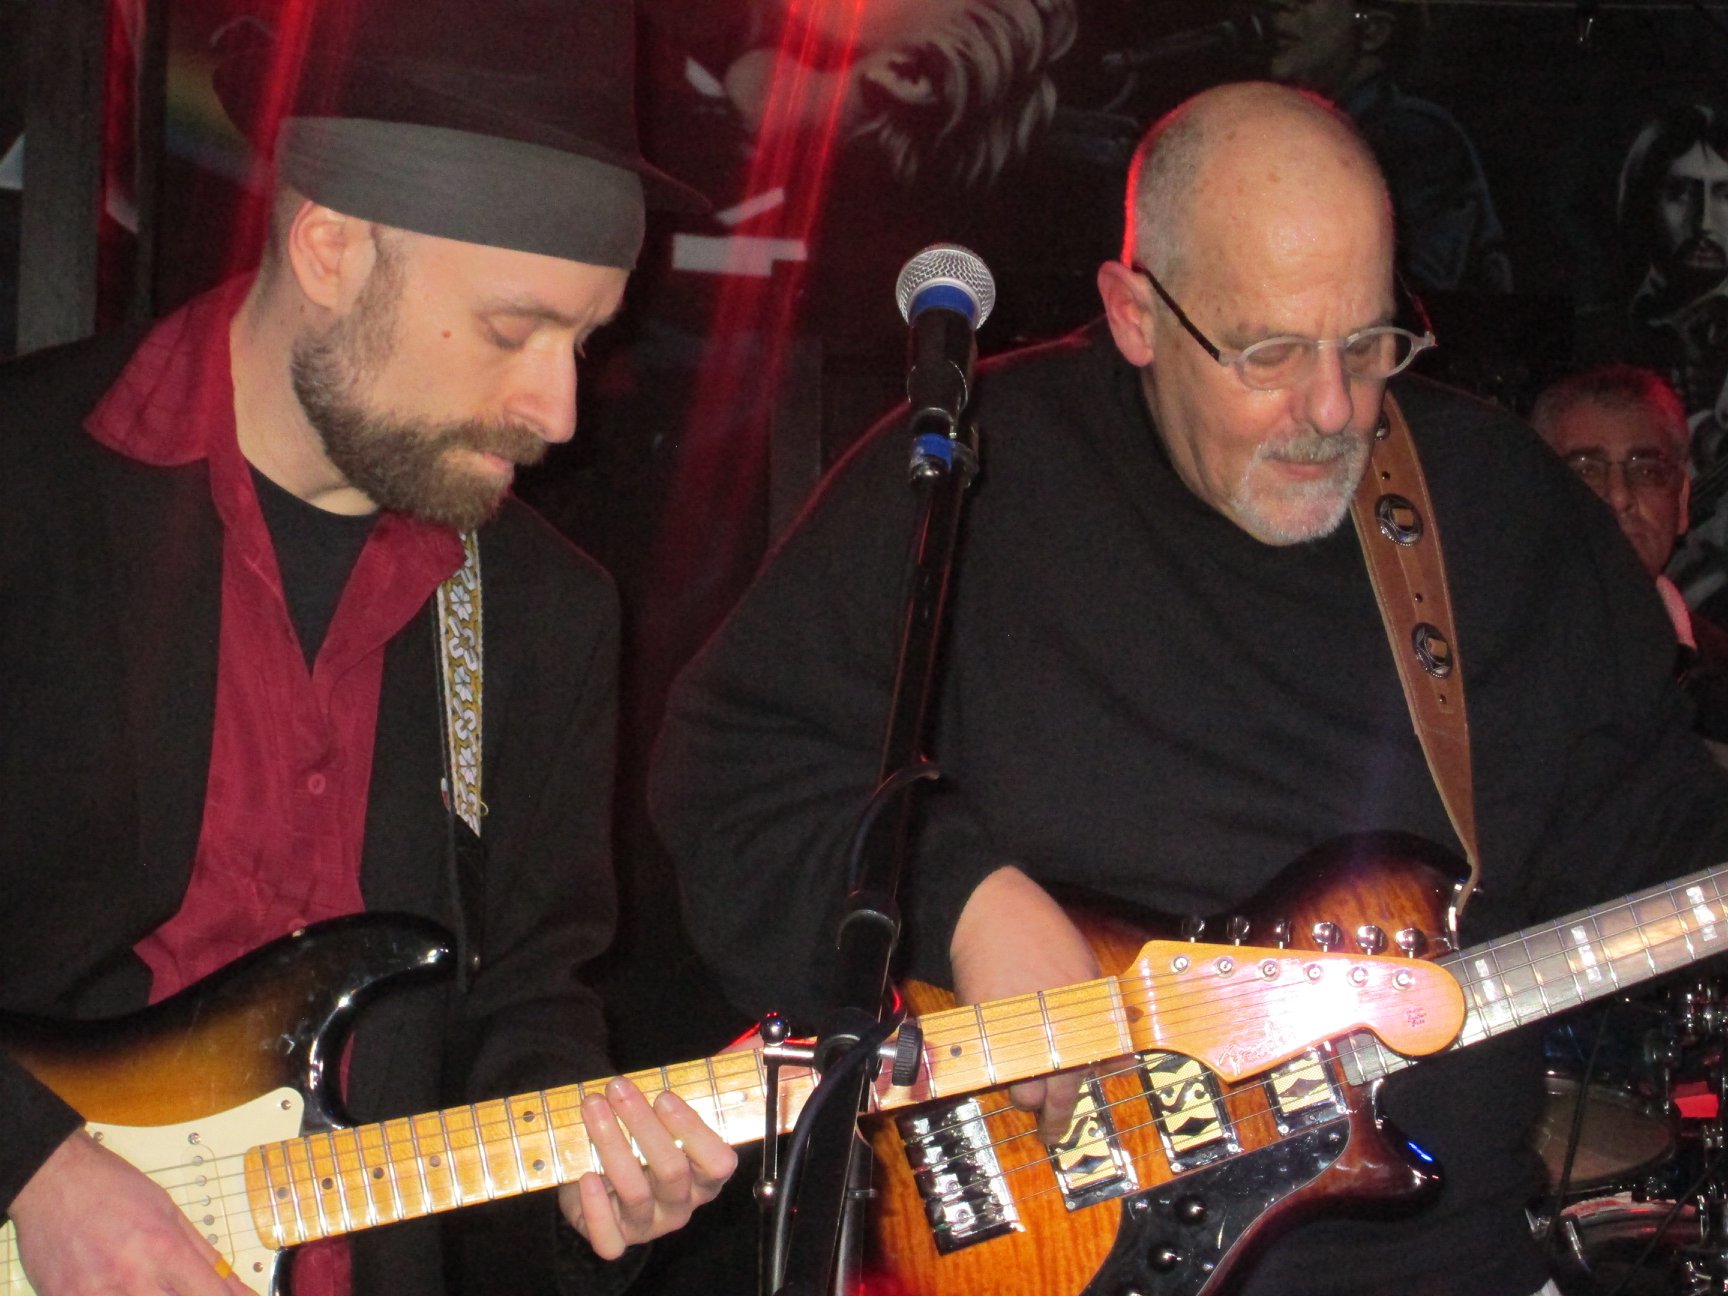 with Lester Saldinger on Bass